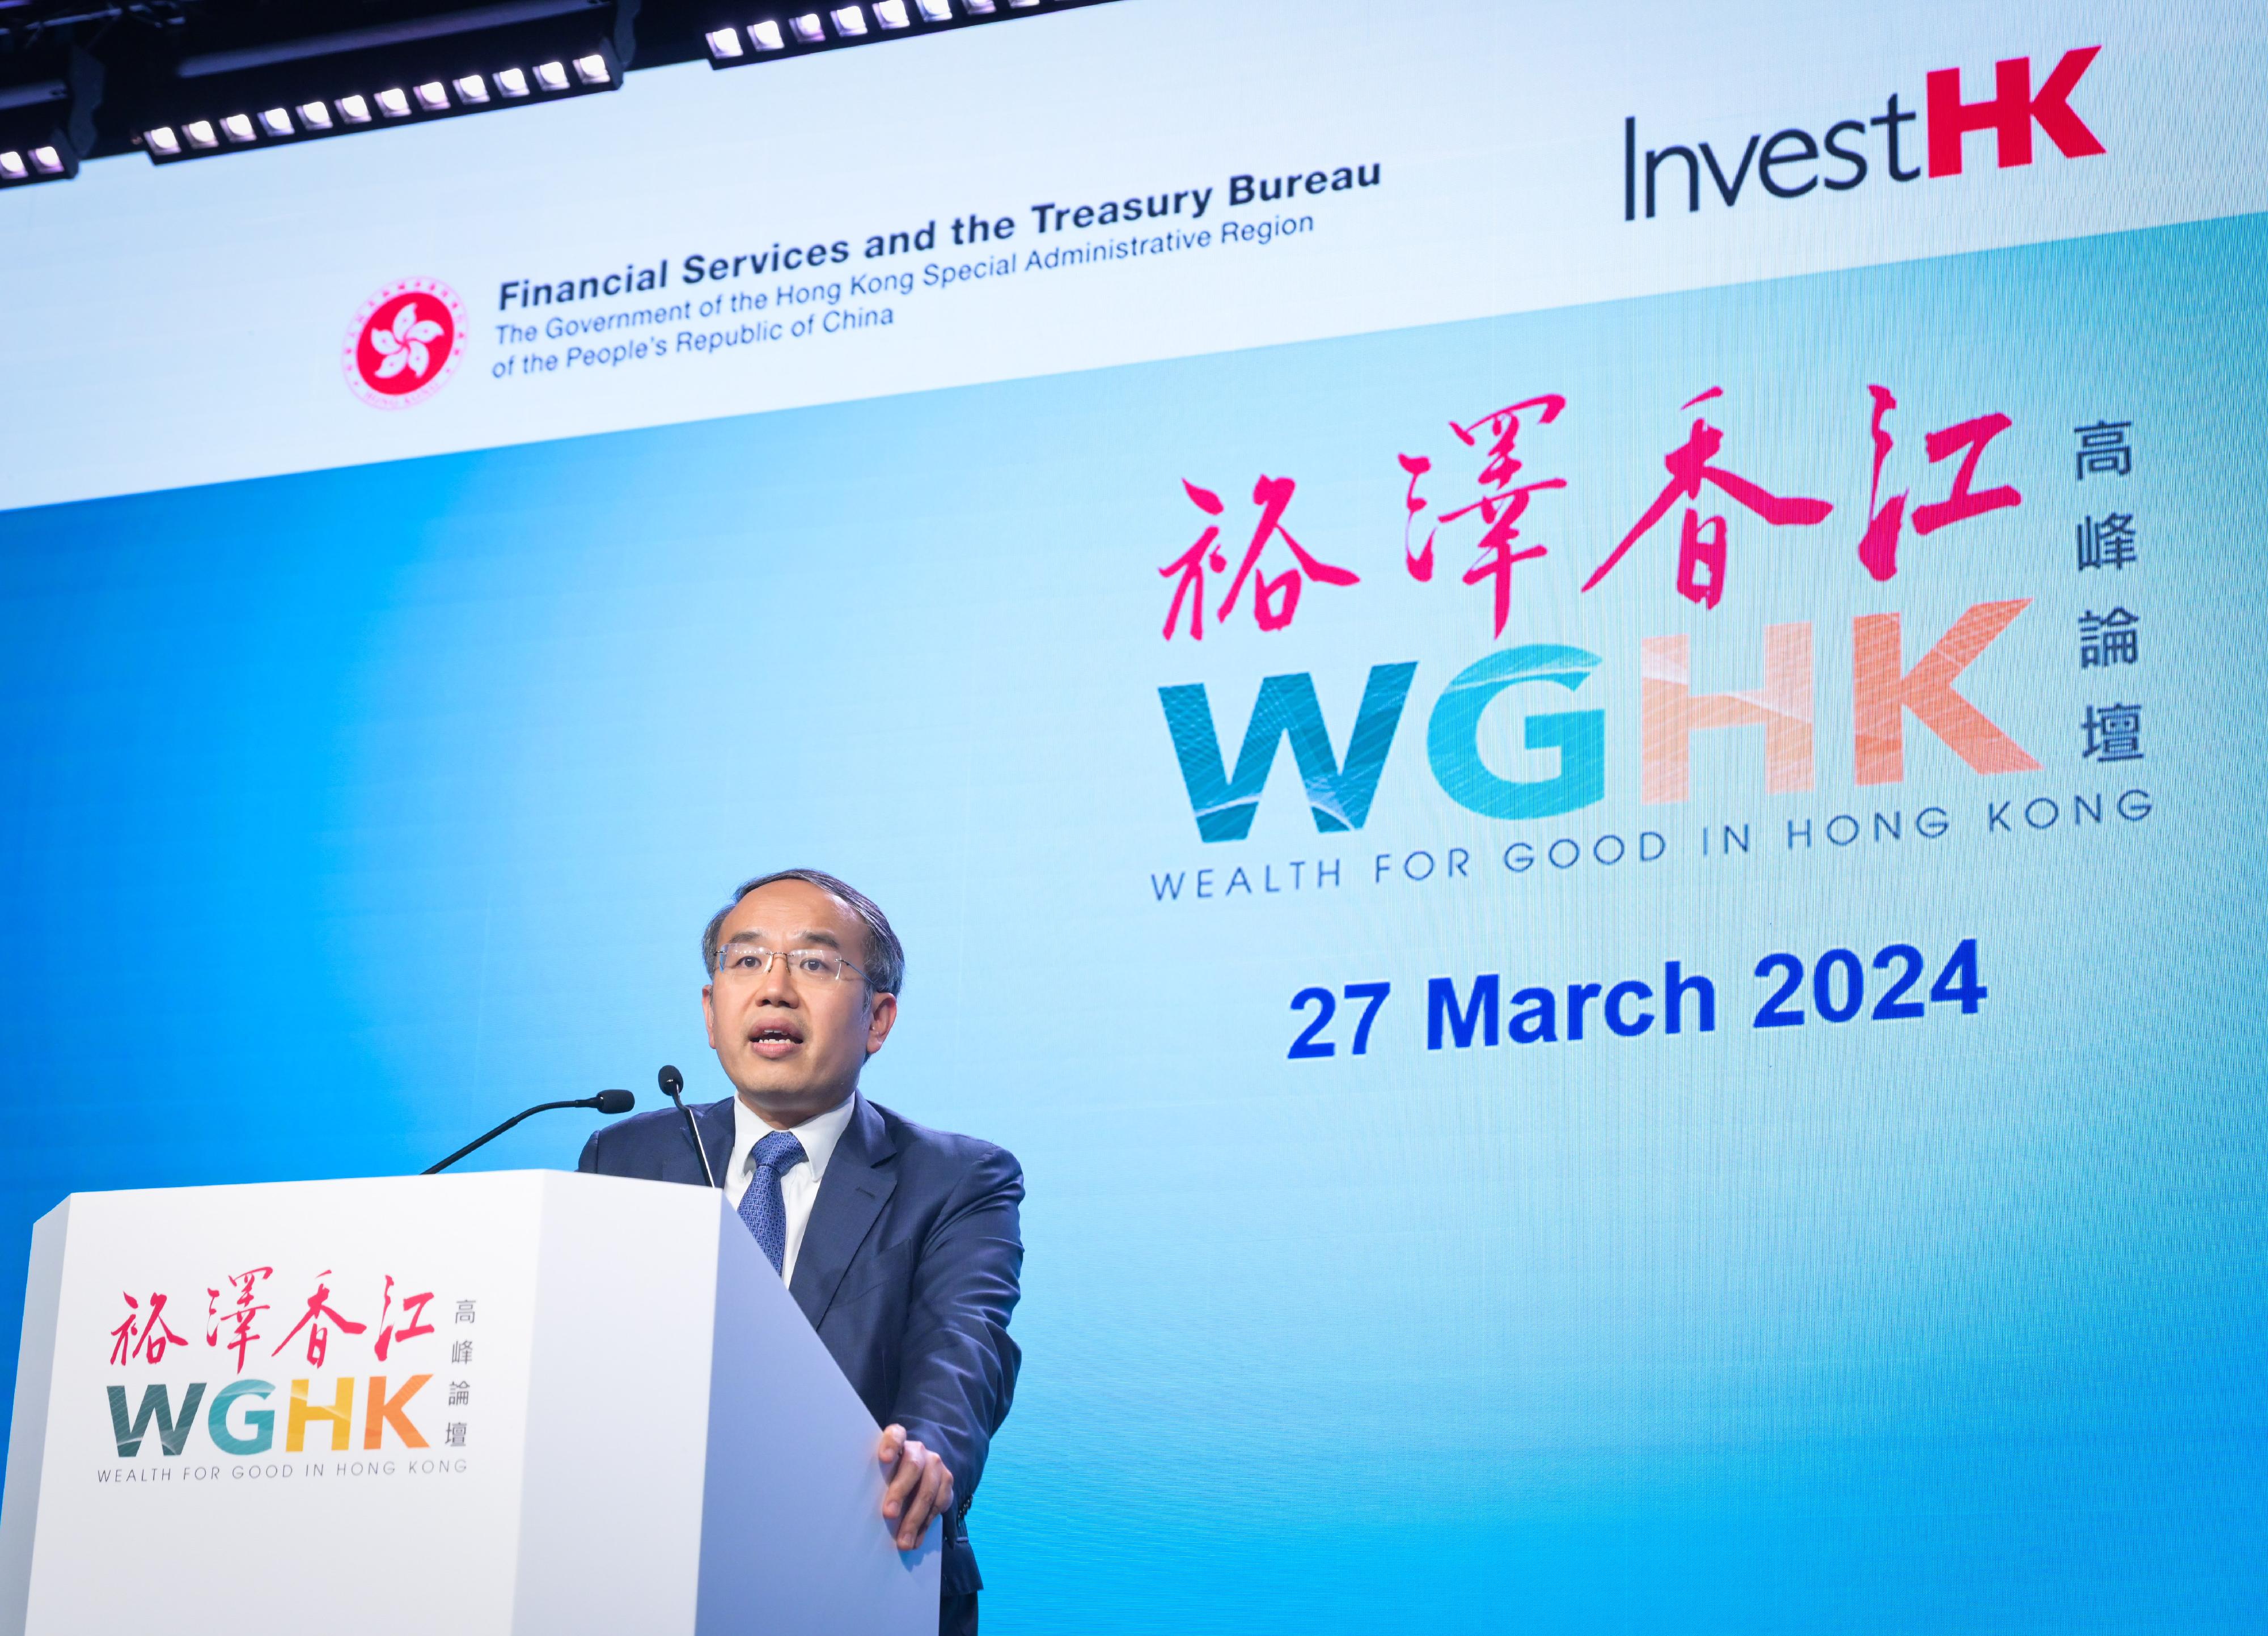 The Secretary for Financial Services and the Treasury, Mr Christopher Hui, speaks at the Wealth for Good in Hong Kong Summit today (March 27).